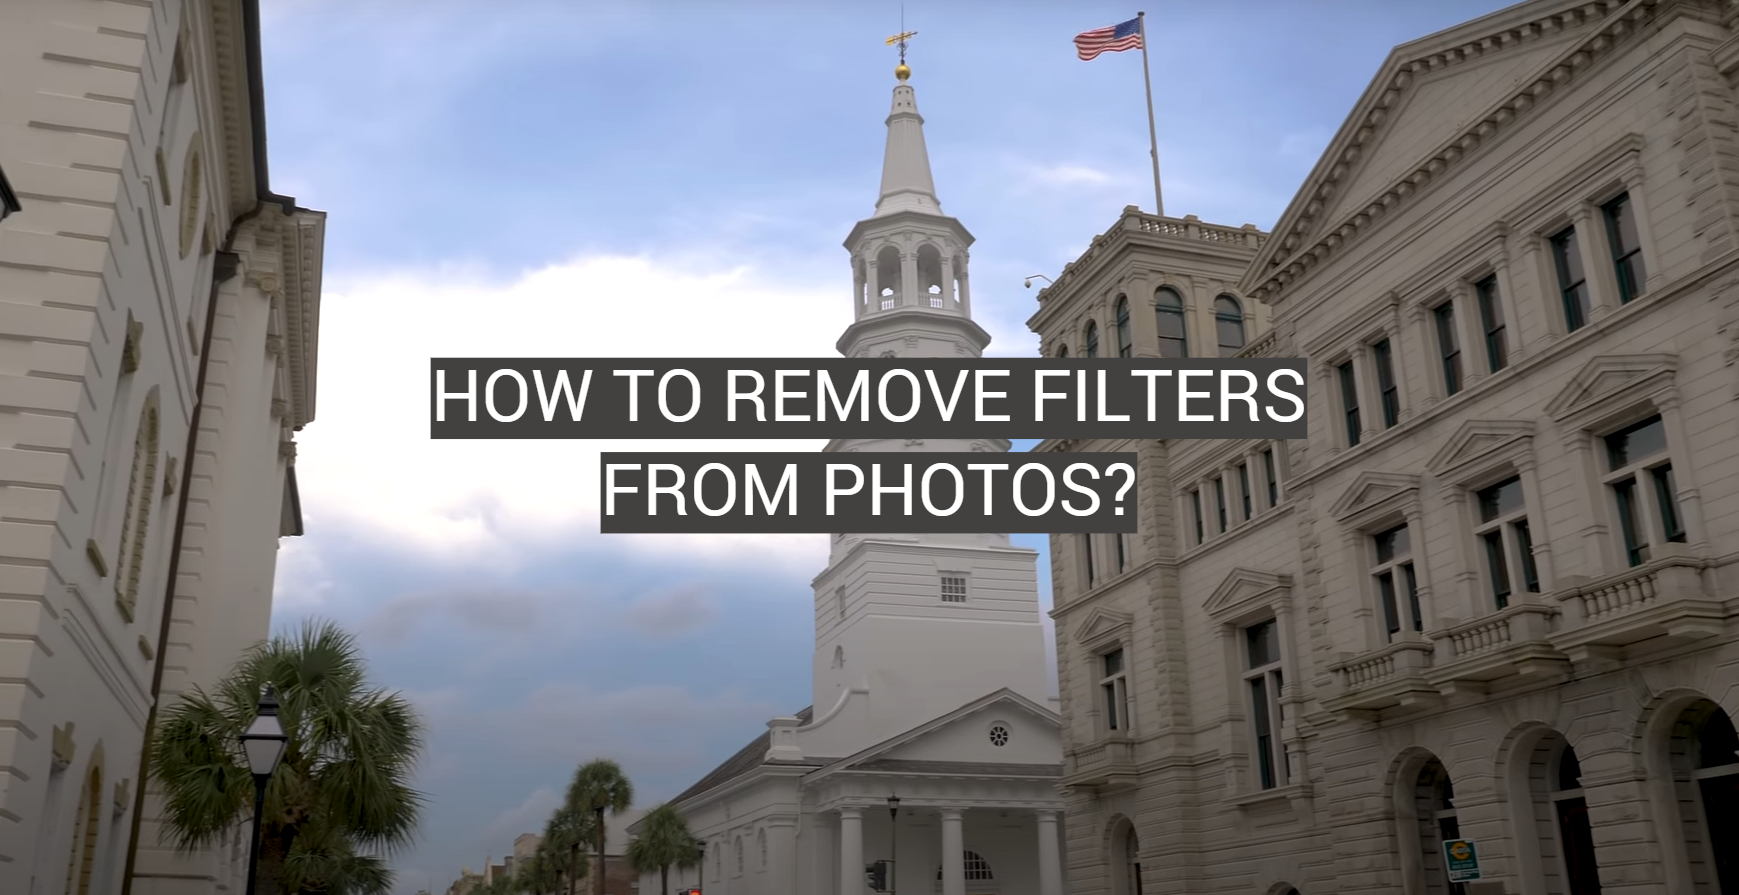 How to Remove Filters From Photos?